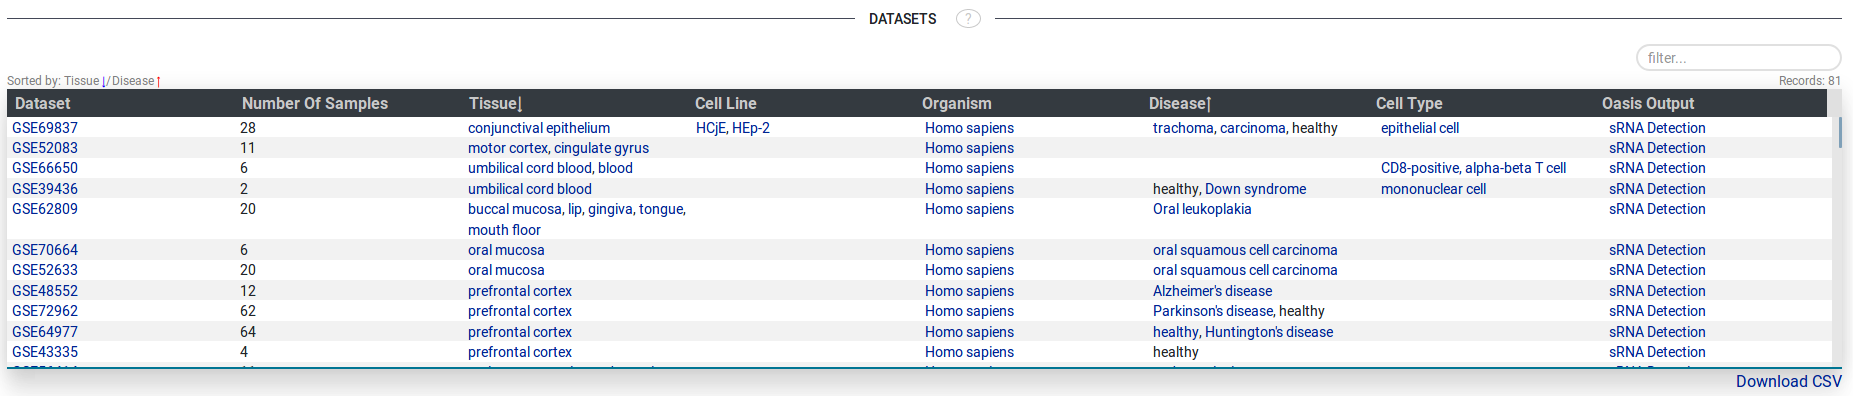 Datasets Overview